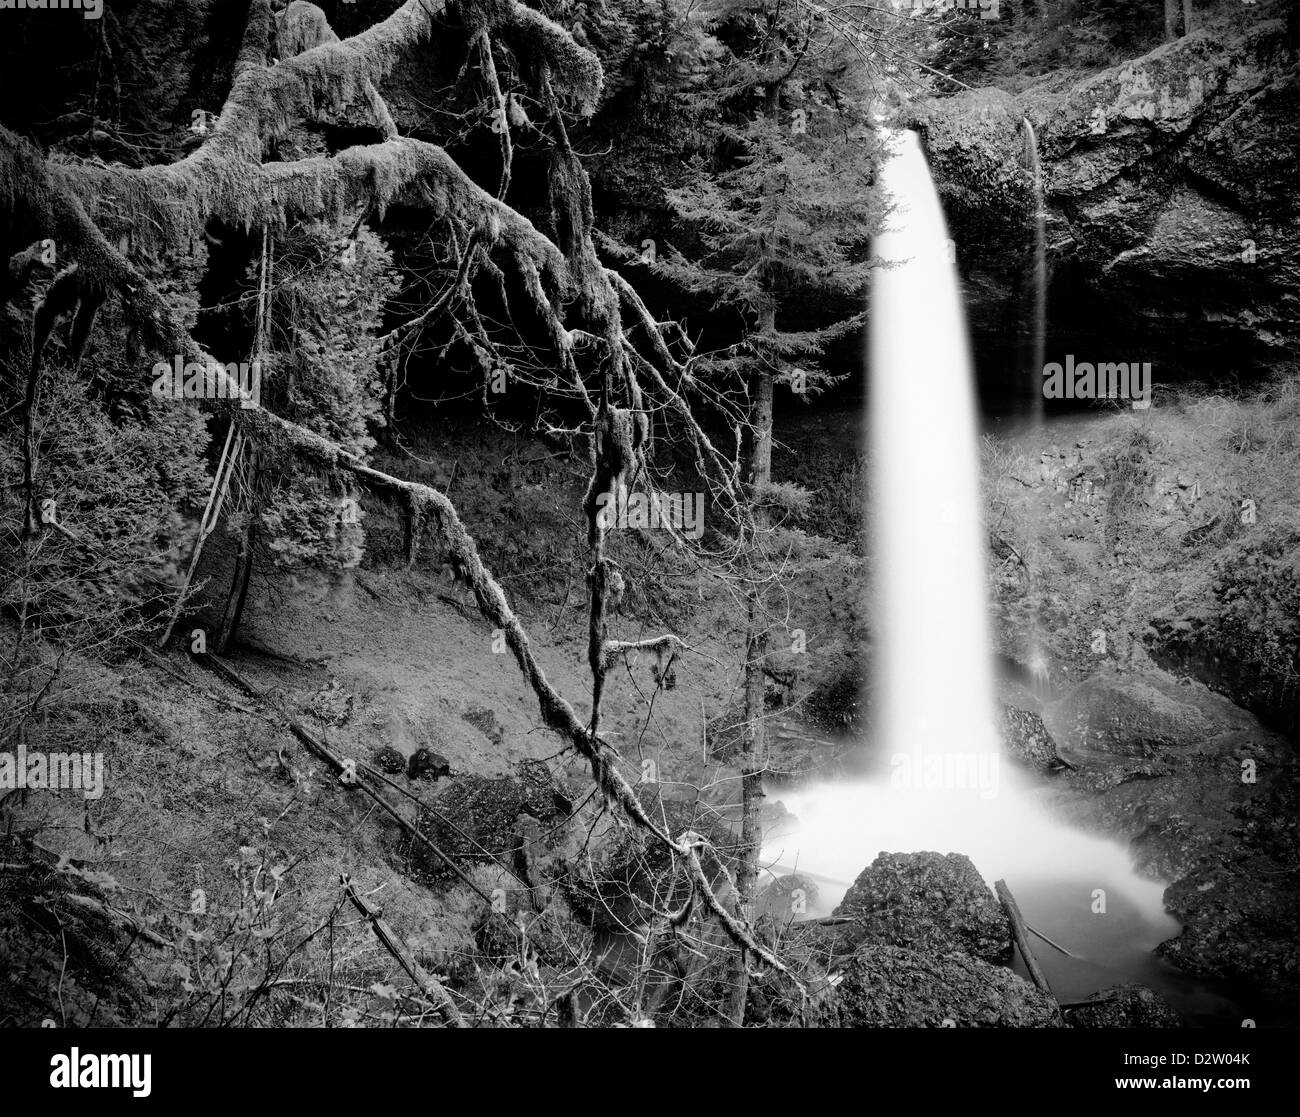 Falls park Black and White Stock Photos & Images - Alamy